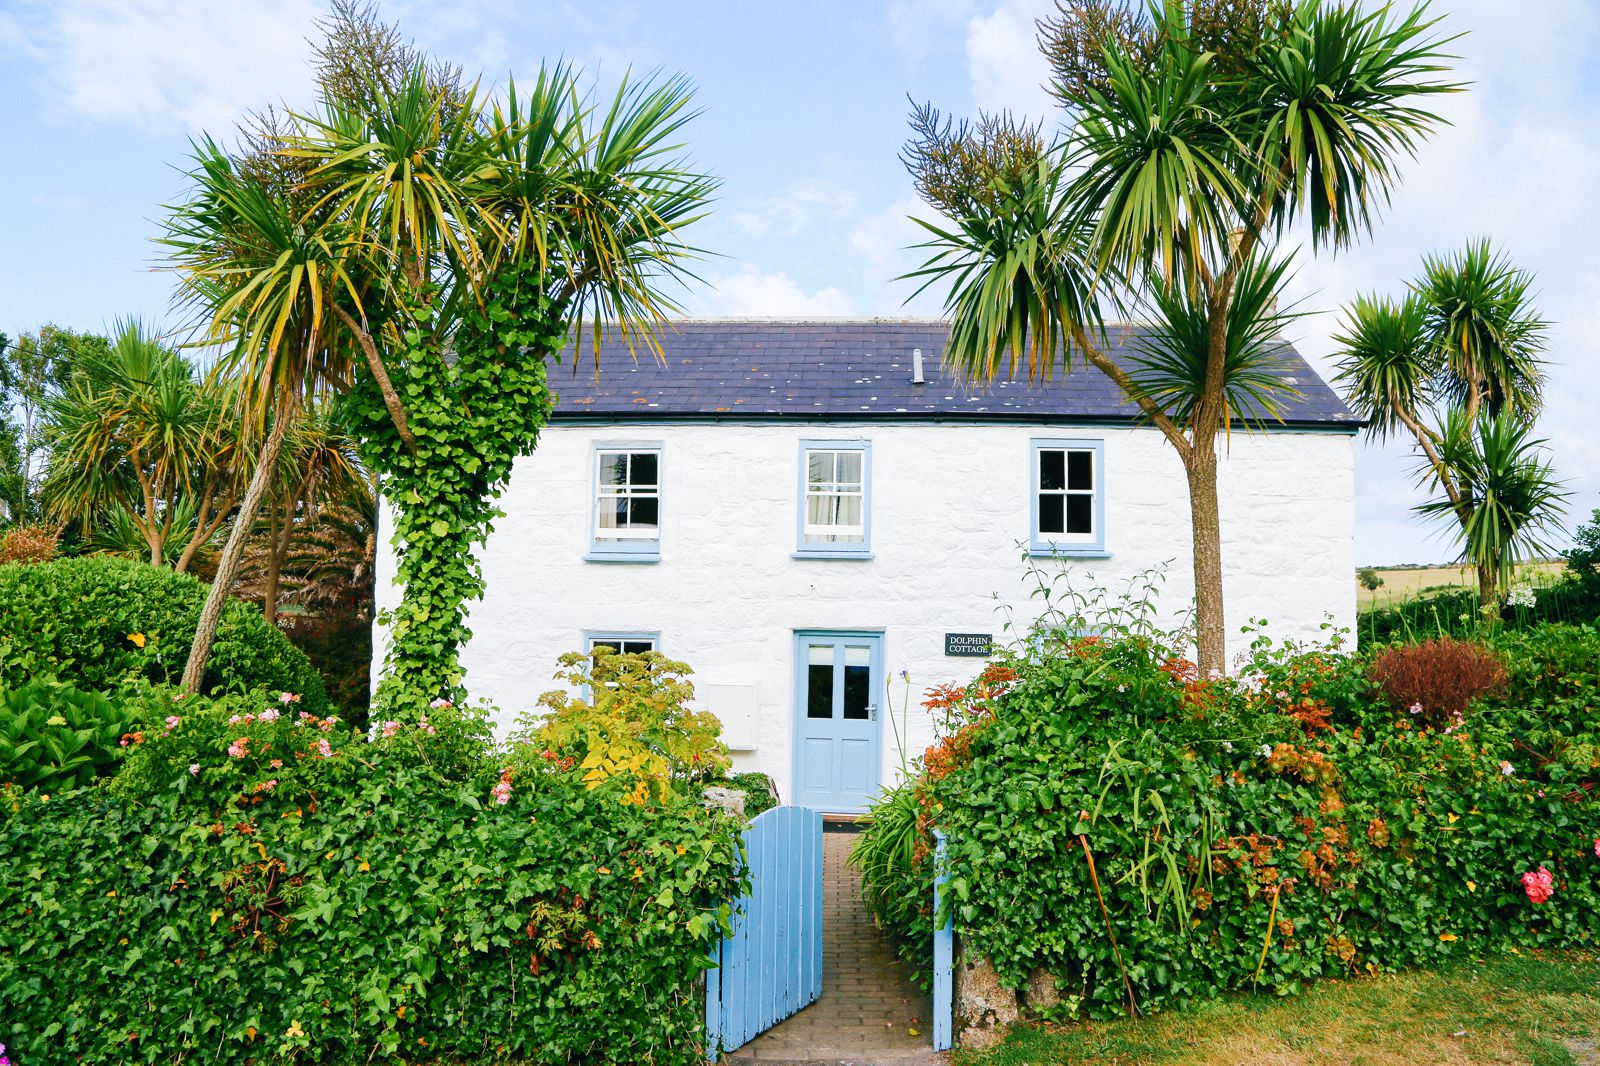 A 1 Week Travel Itinerary For Visiting The Isles Of Scilly The